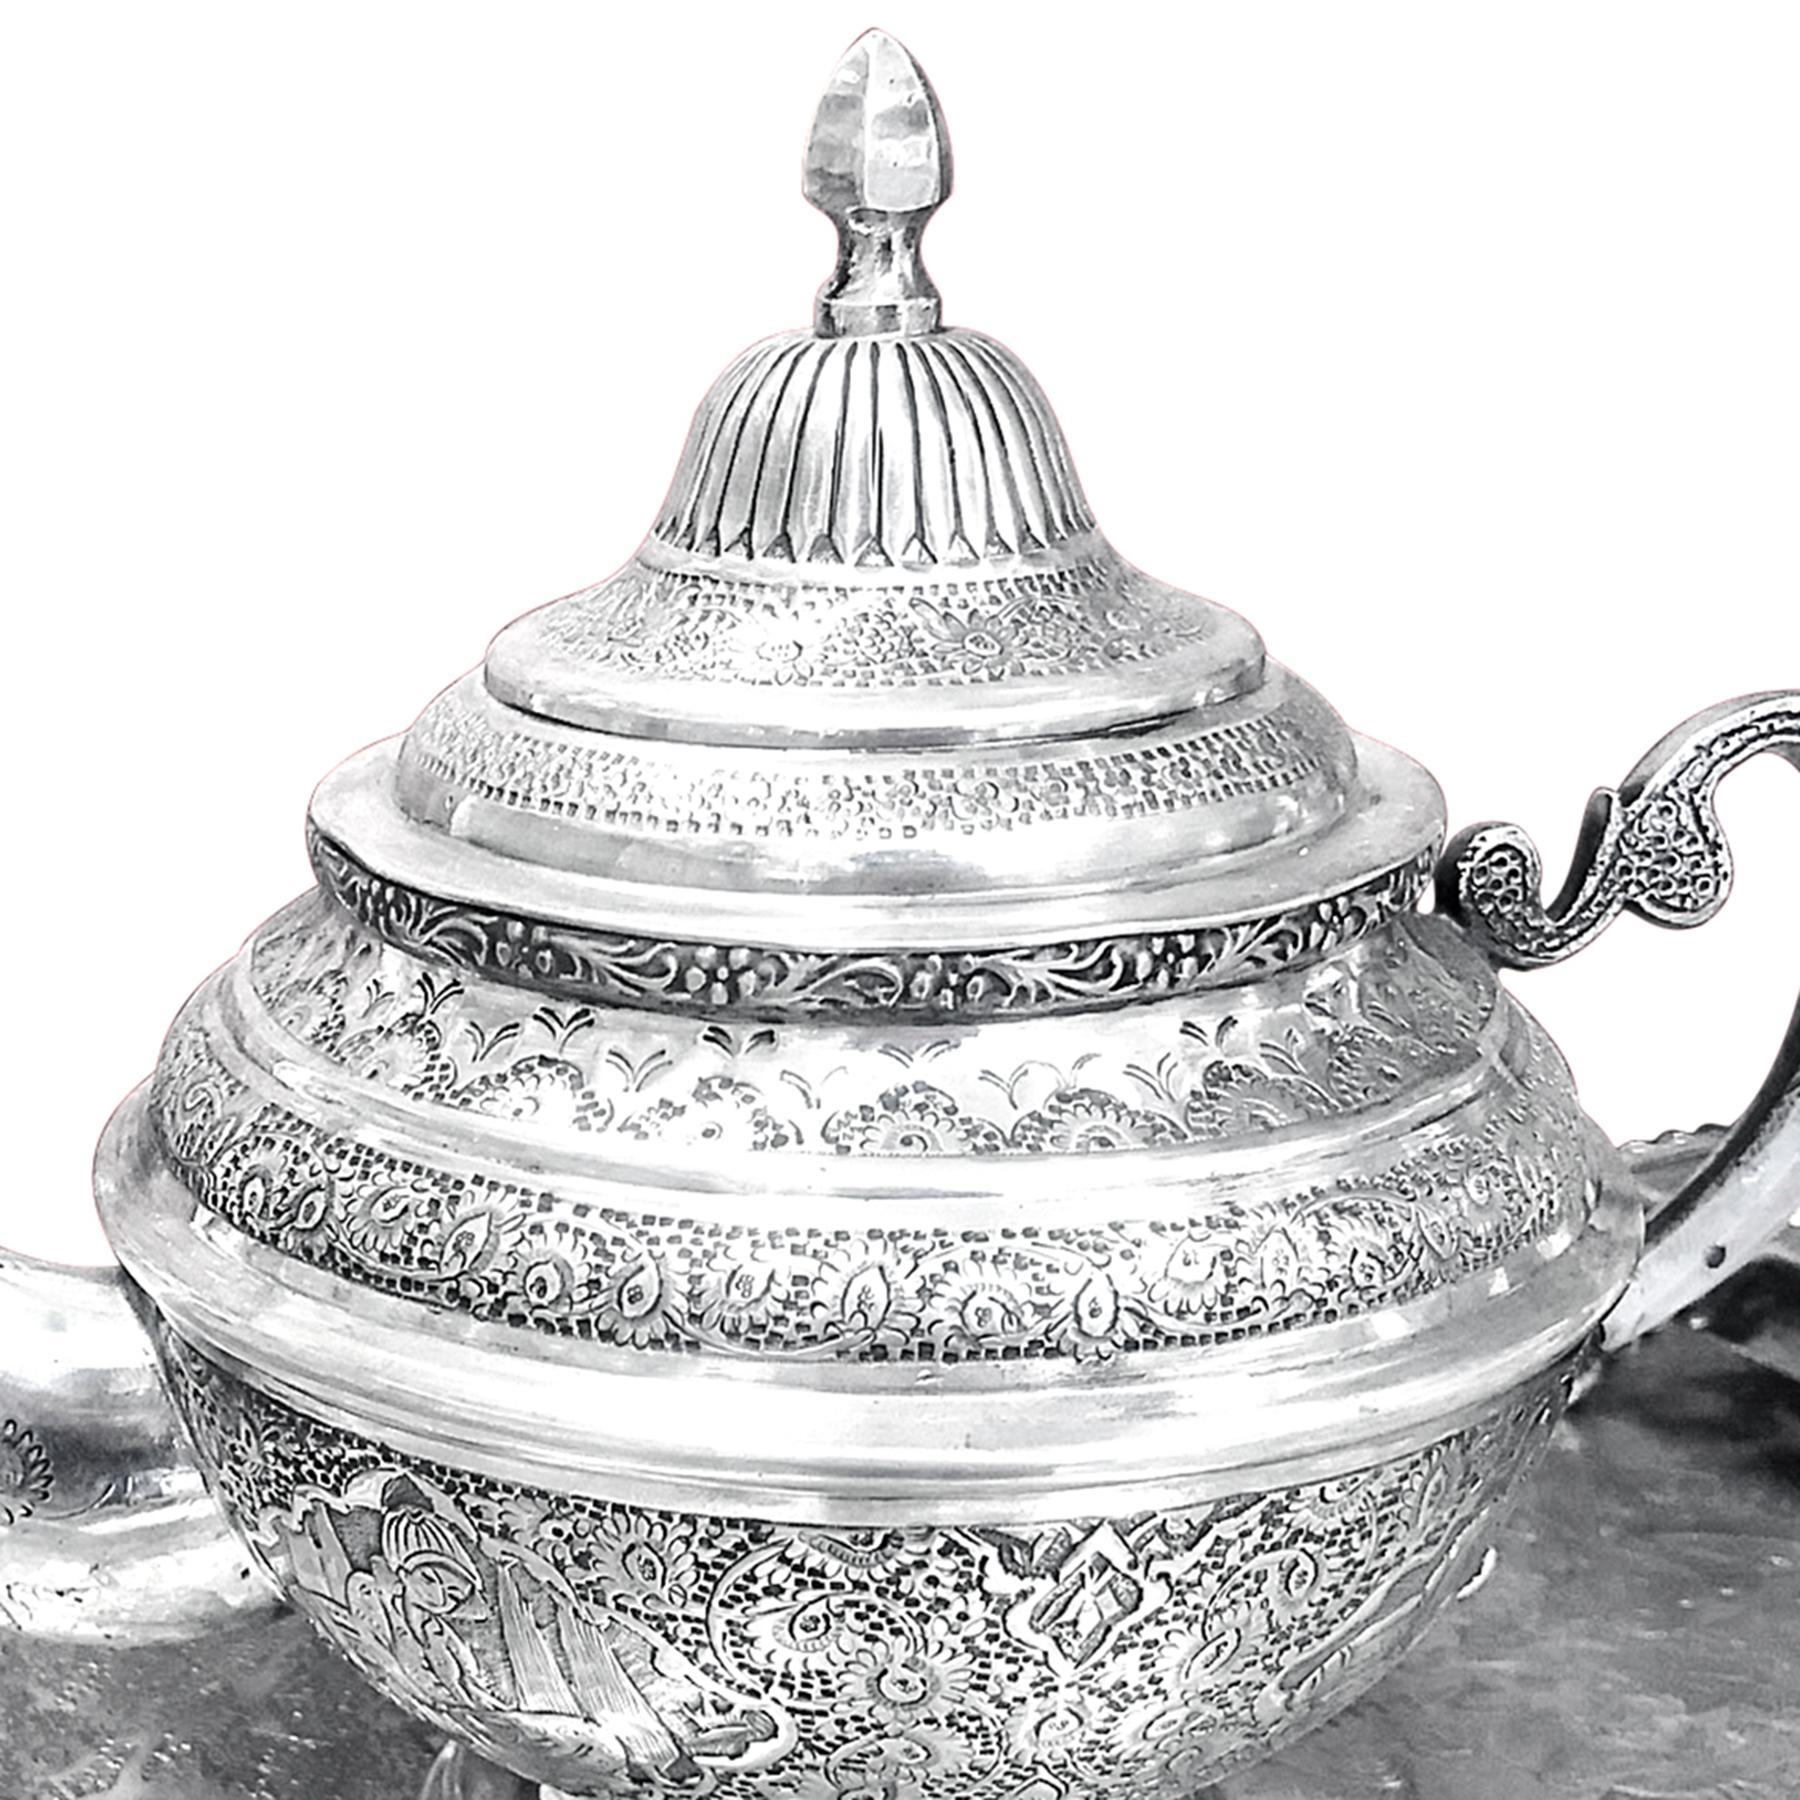 Collectible 1920s Silver Samavar from Iran Handcrafted &handCarved .Rare Piece 10